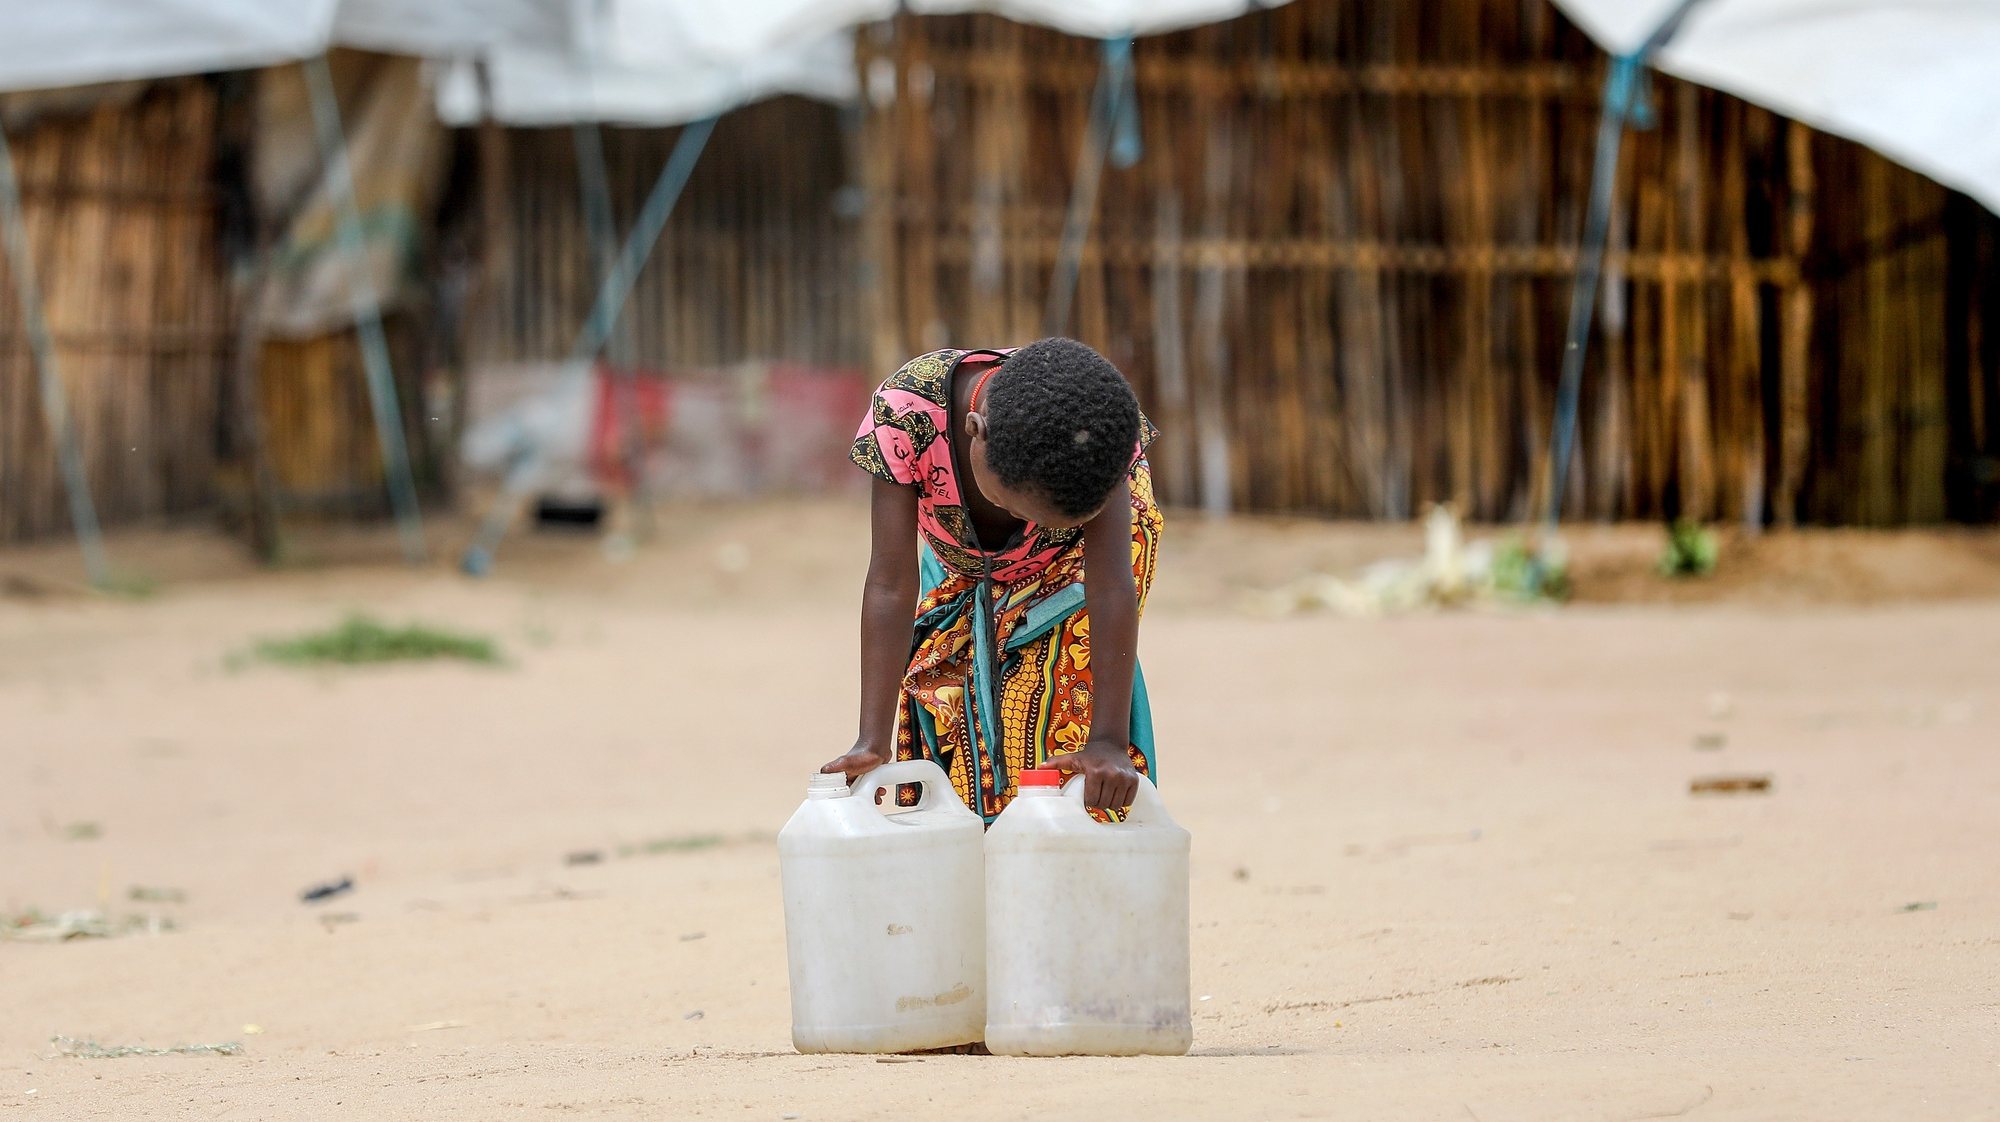 A young displaced girl carrying water bidons in the 25 June relocated camp in Belibize, near Metuge, northern Mozambique, 10 April 2021. The violence unleashed more than three years ago in Cabo Delgado province escalated again about two weeks ago, when armed groups first attacked the town of Palma. JOAO RELVAS/LUSA